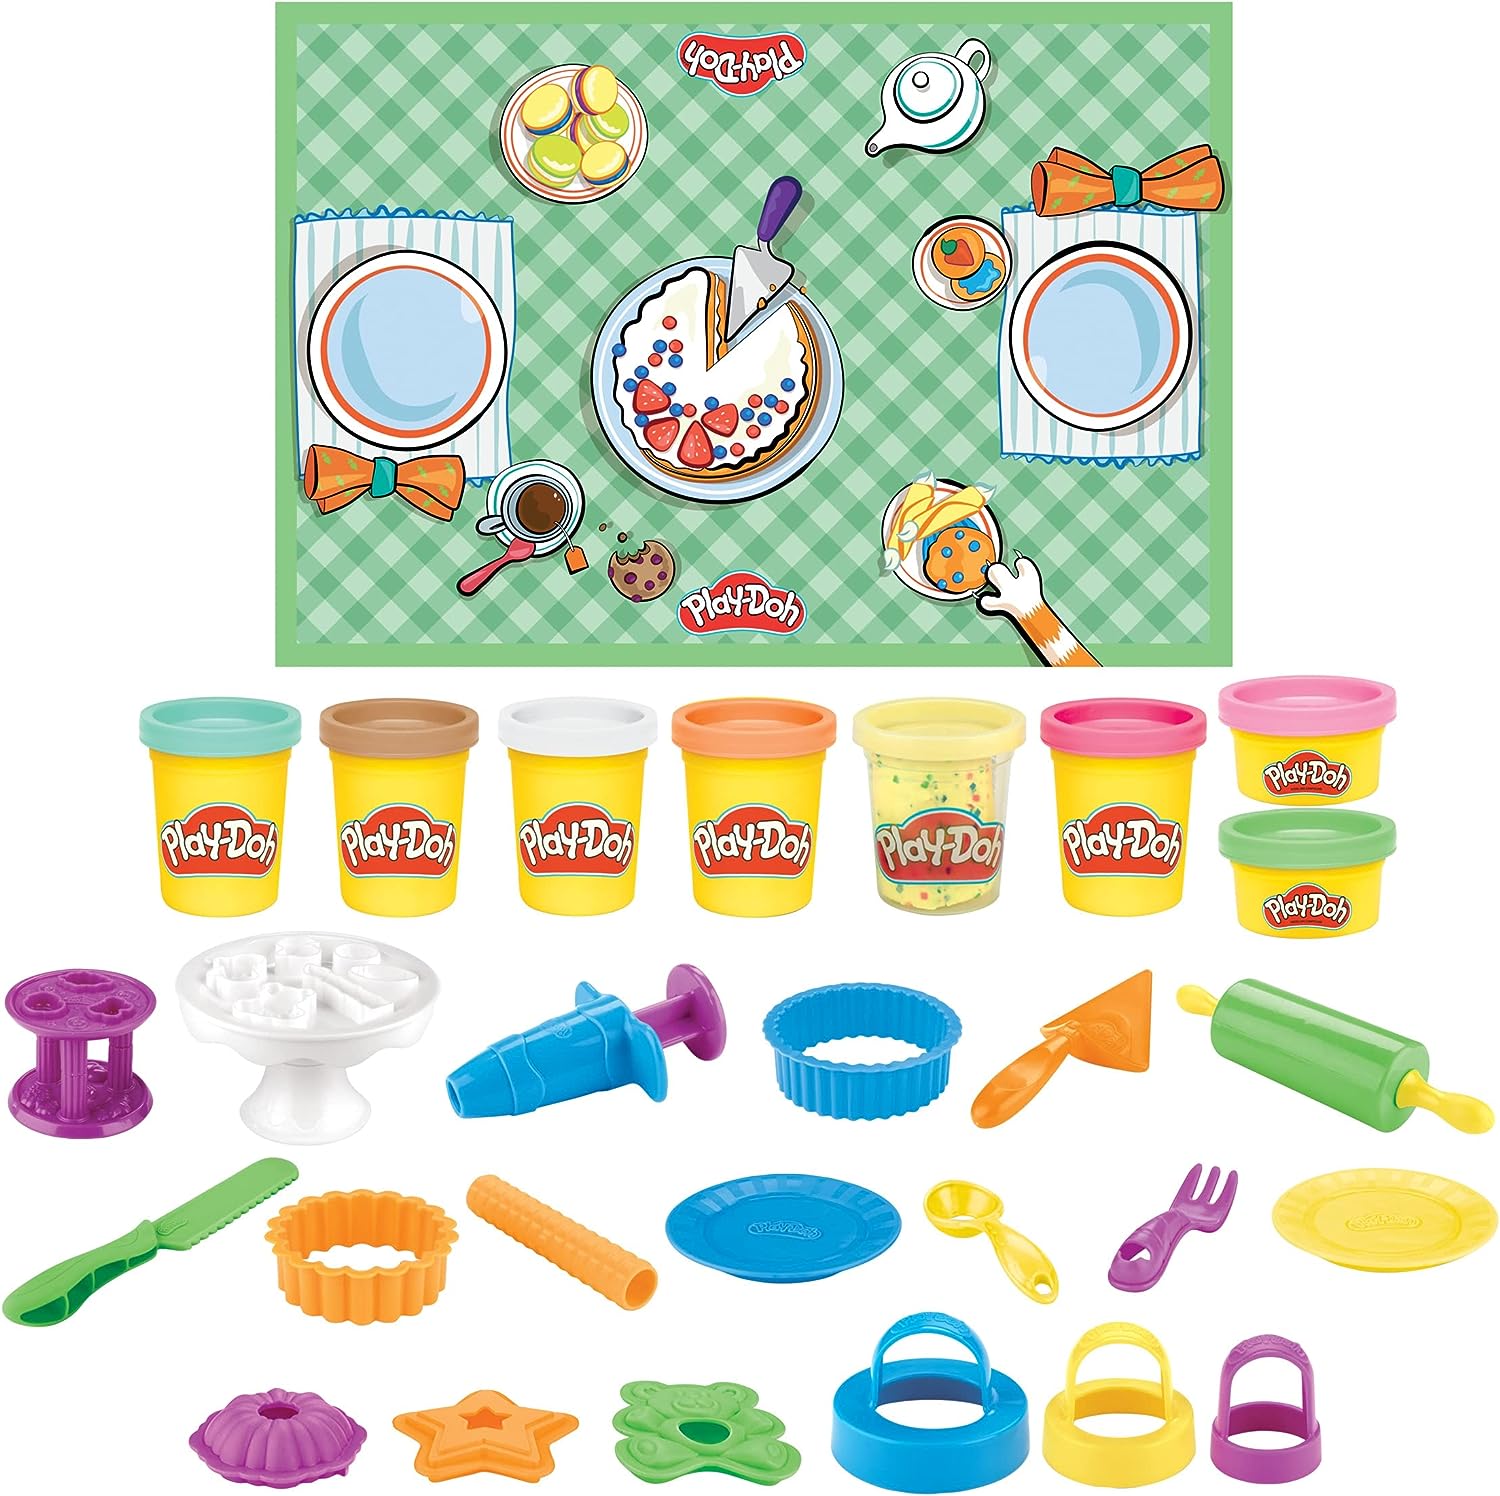 Play-Doh Kitchen Creations - Sweet Cakes